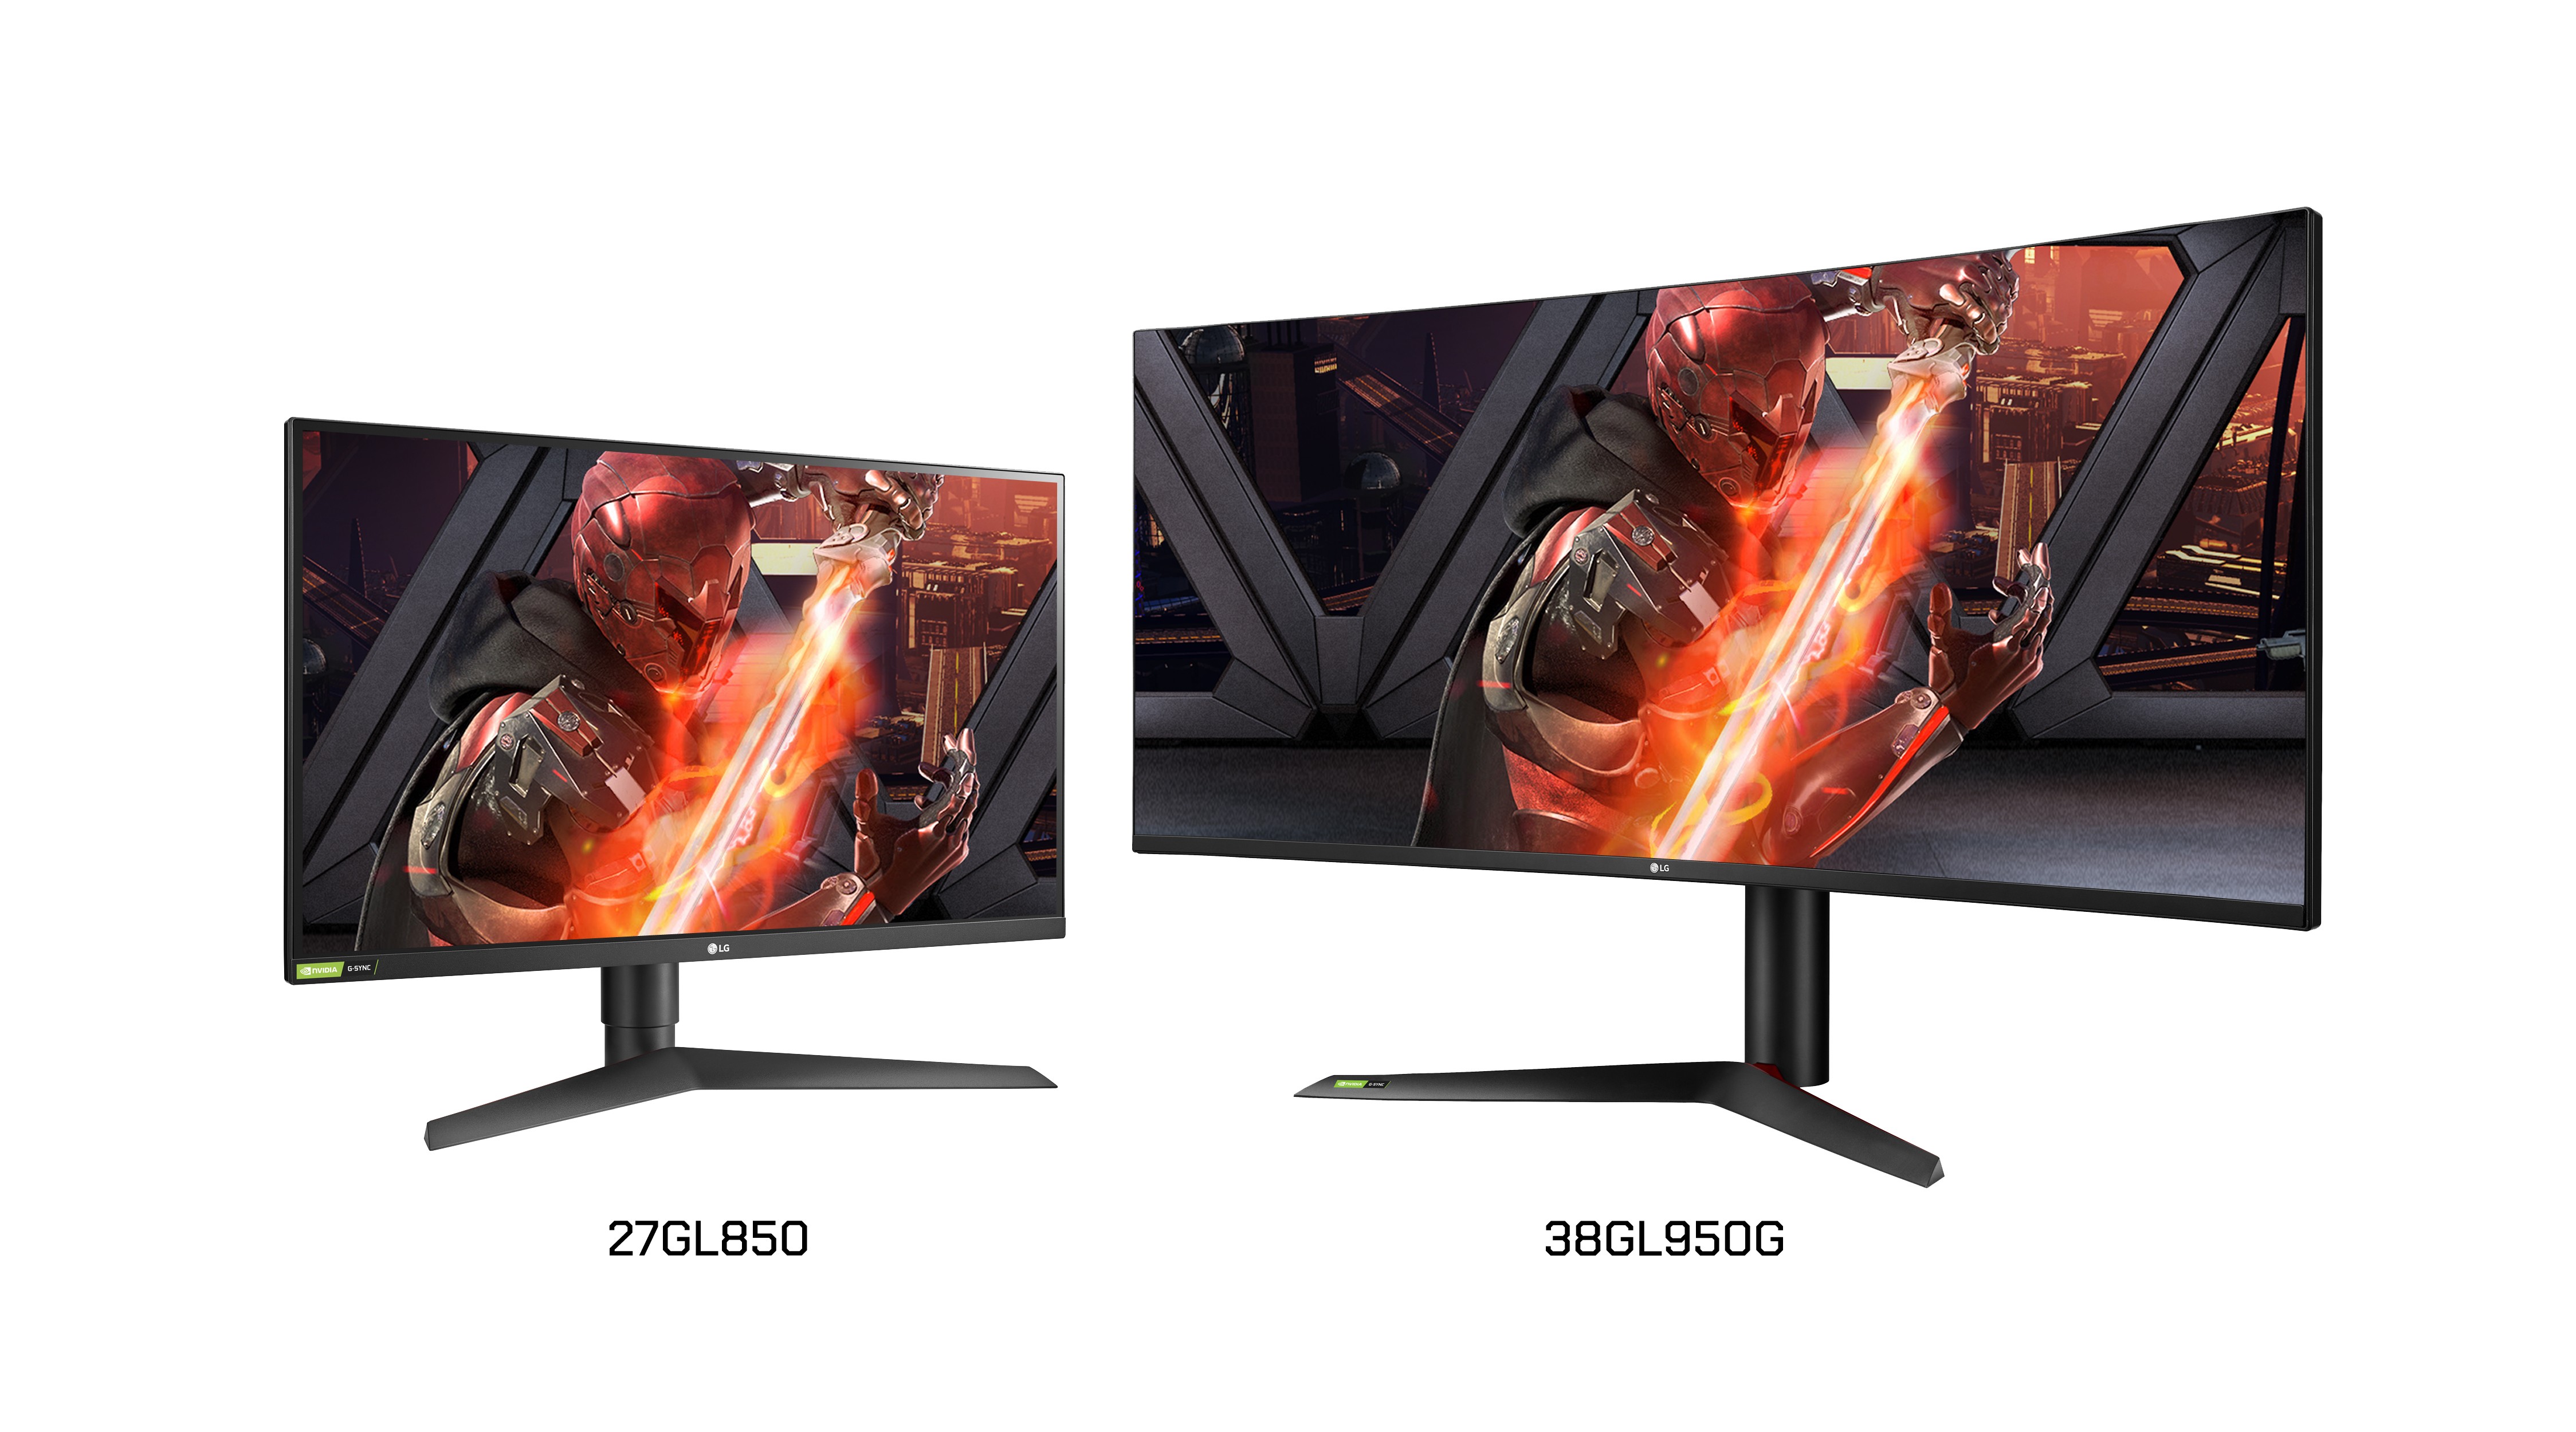 A left-side view of LG UltraGear Nano IPS G-SYNC Gaming Monitor model 27GL850 next to a right-side view of model 38GL950G